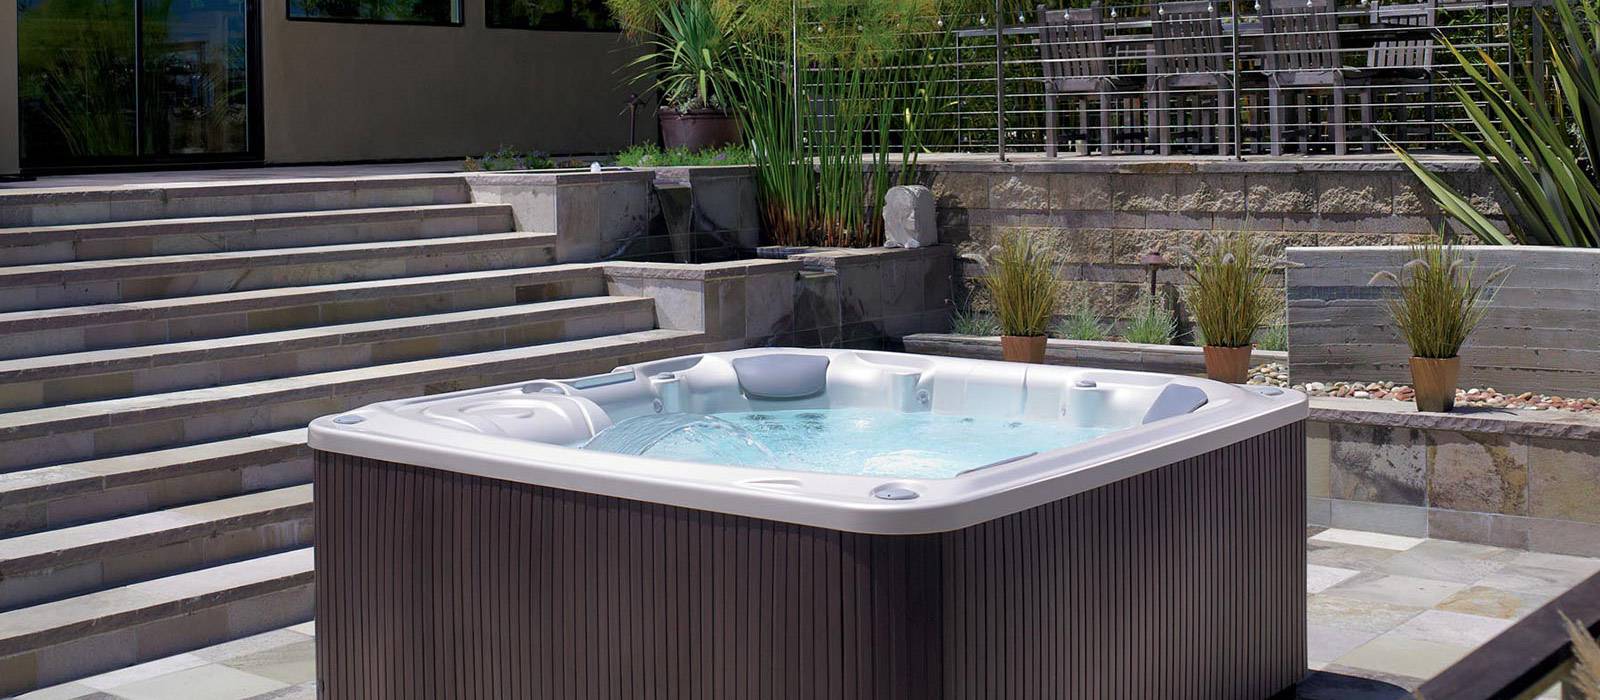 Caring for the Flair hot tub is easy with the optional ACE® saltwater system and EverFresh® water care system. Both systems continuously clean the hot tub with innovative technology. 